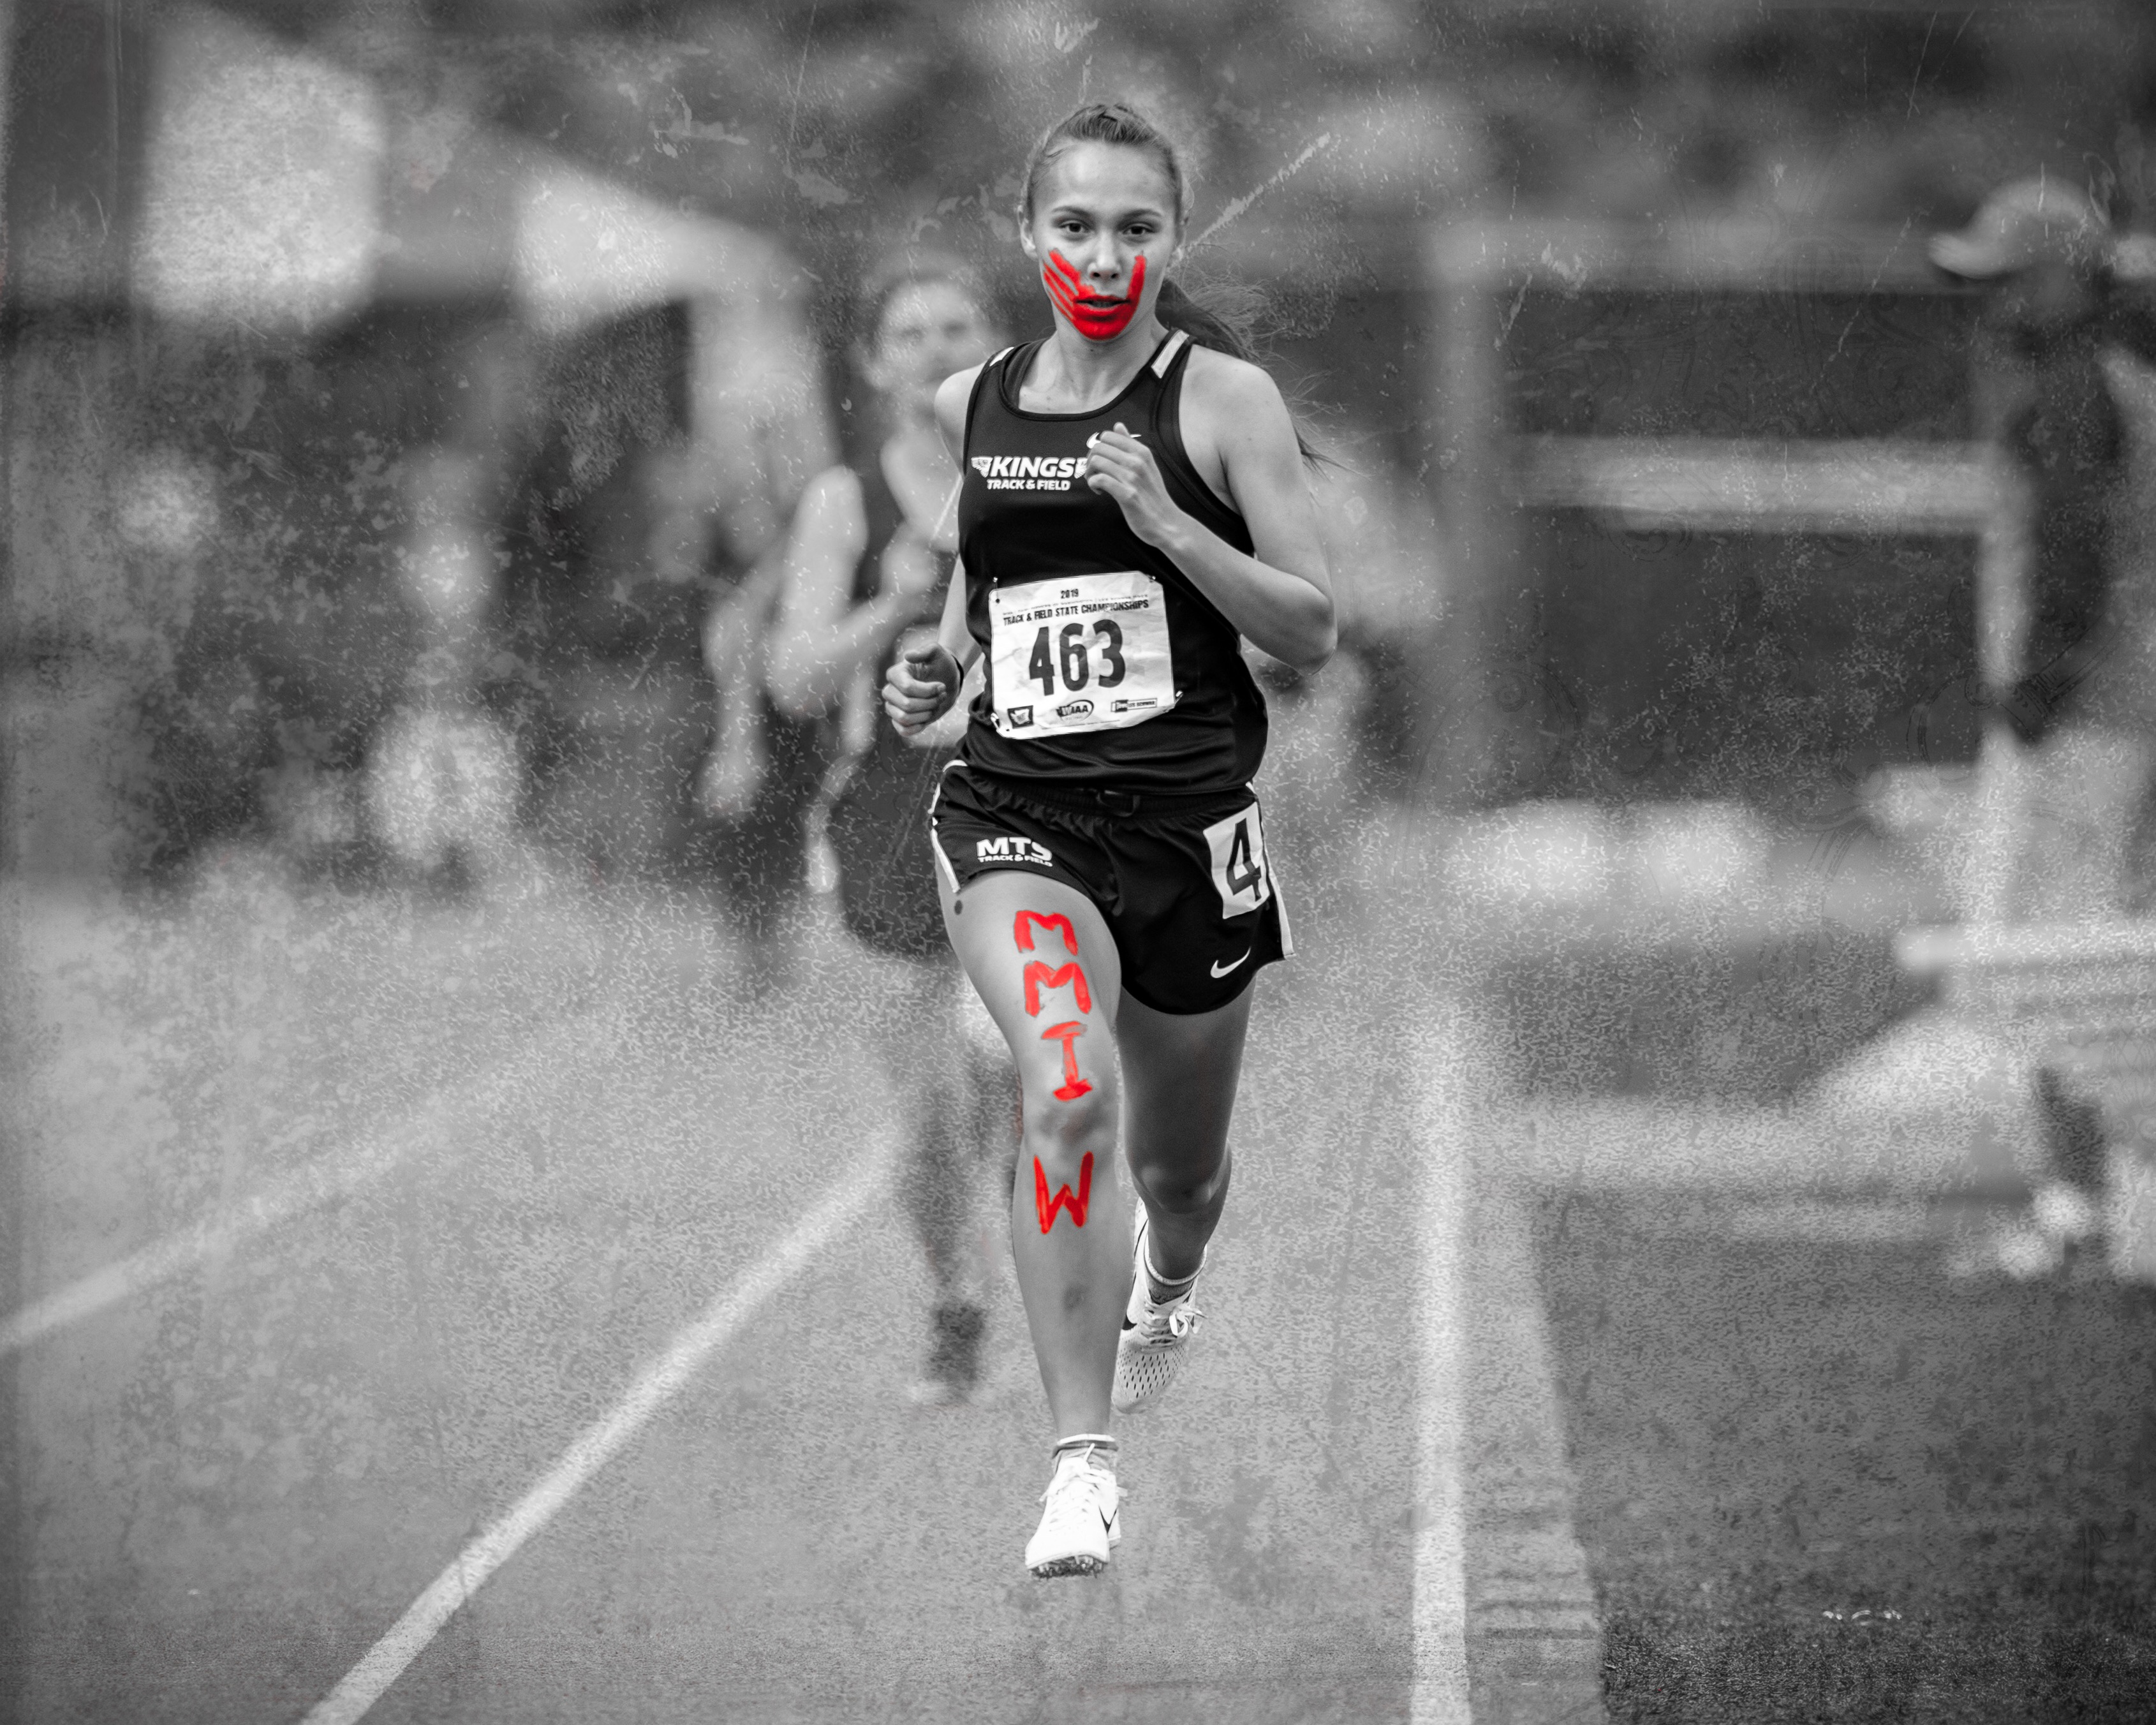 Rosalie Fish, running with a painted red handprint across her face and the letters "MMIW" along her leg to raise awareness of the Missing and Murdered Indigenous Women crisis. Photo courtesy of Fish.